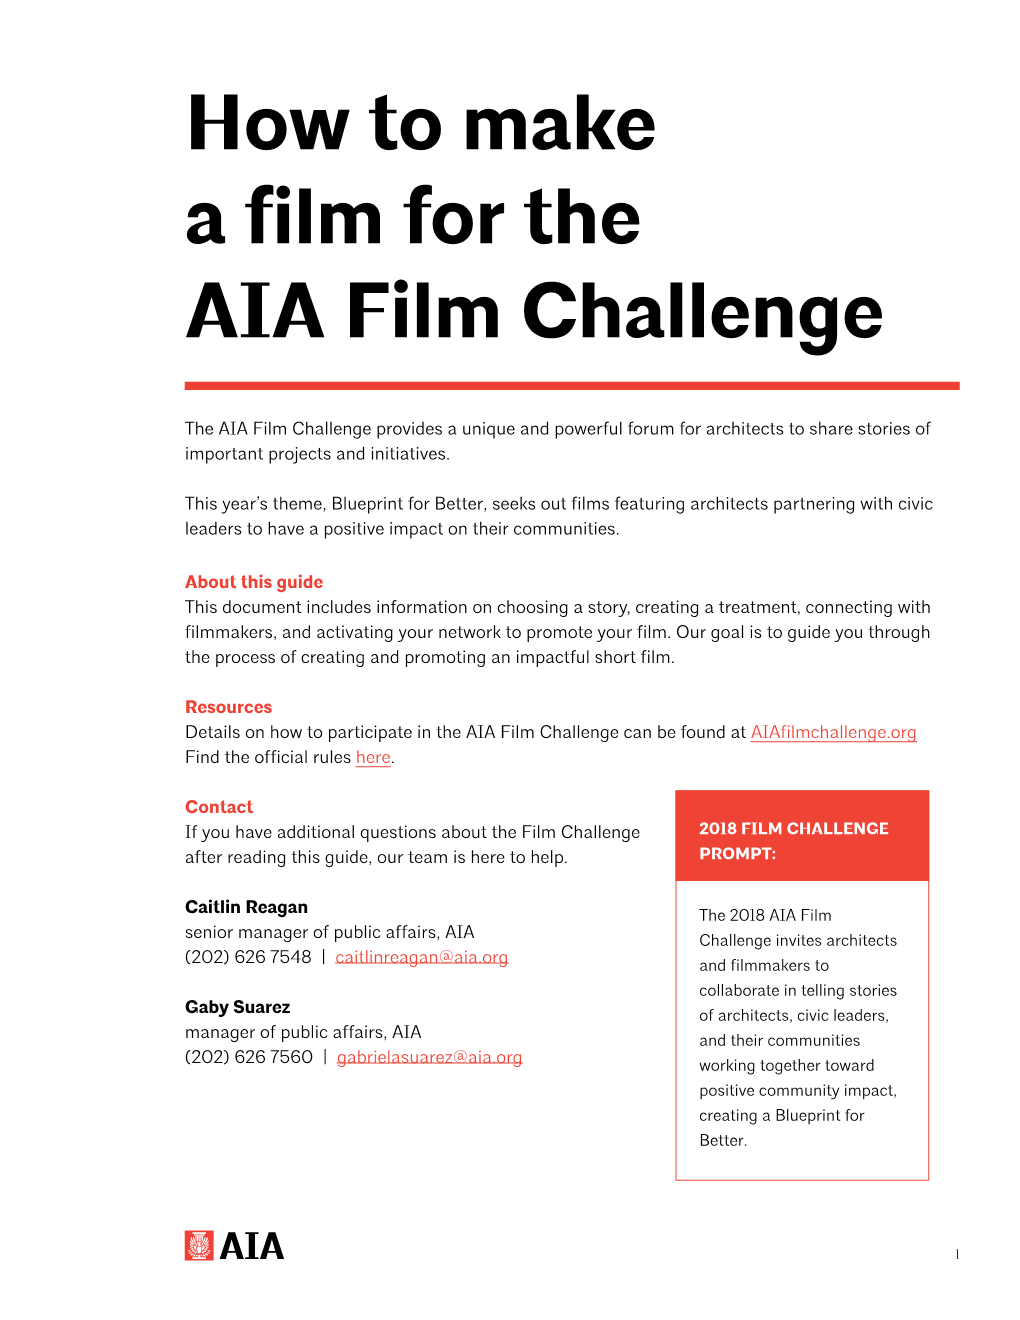 How to Make a Film for the AIA Film Challenge